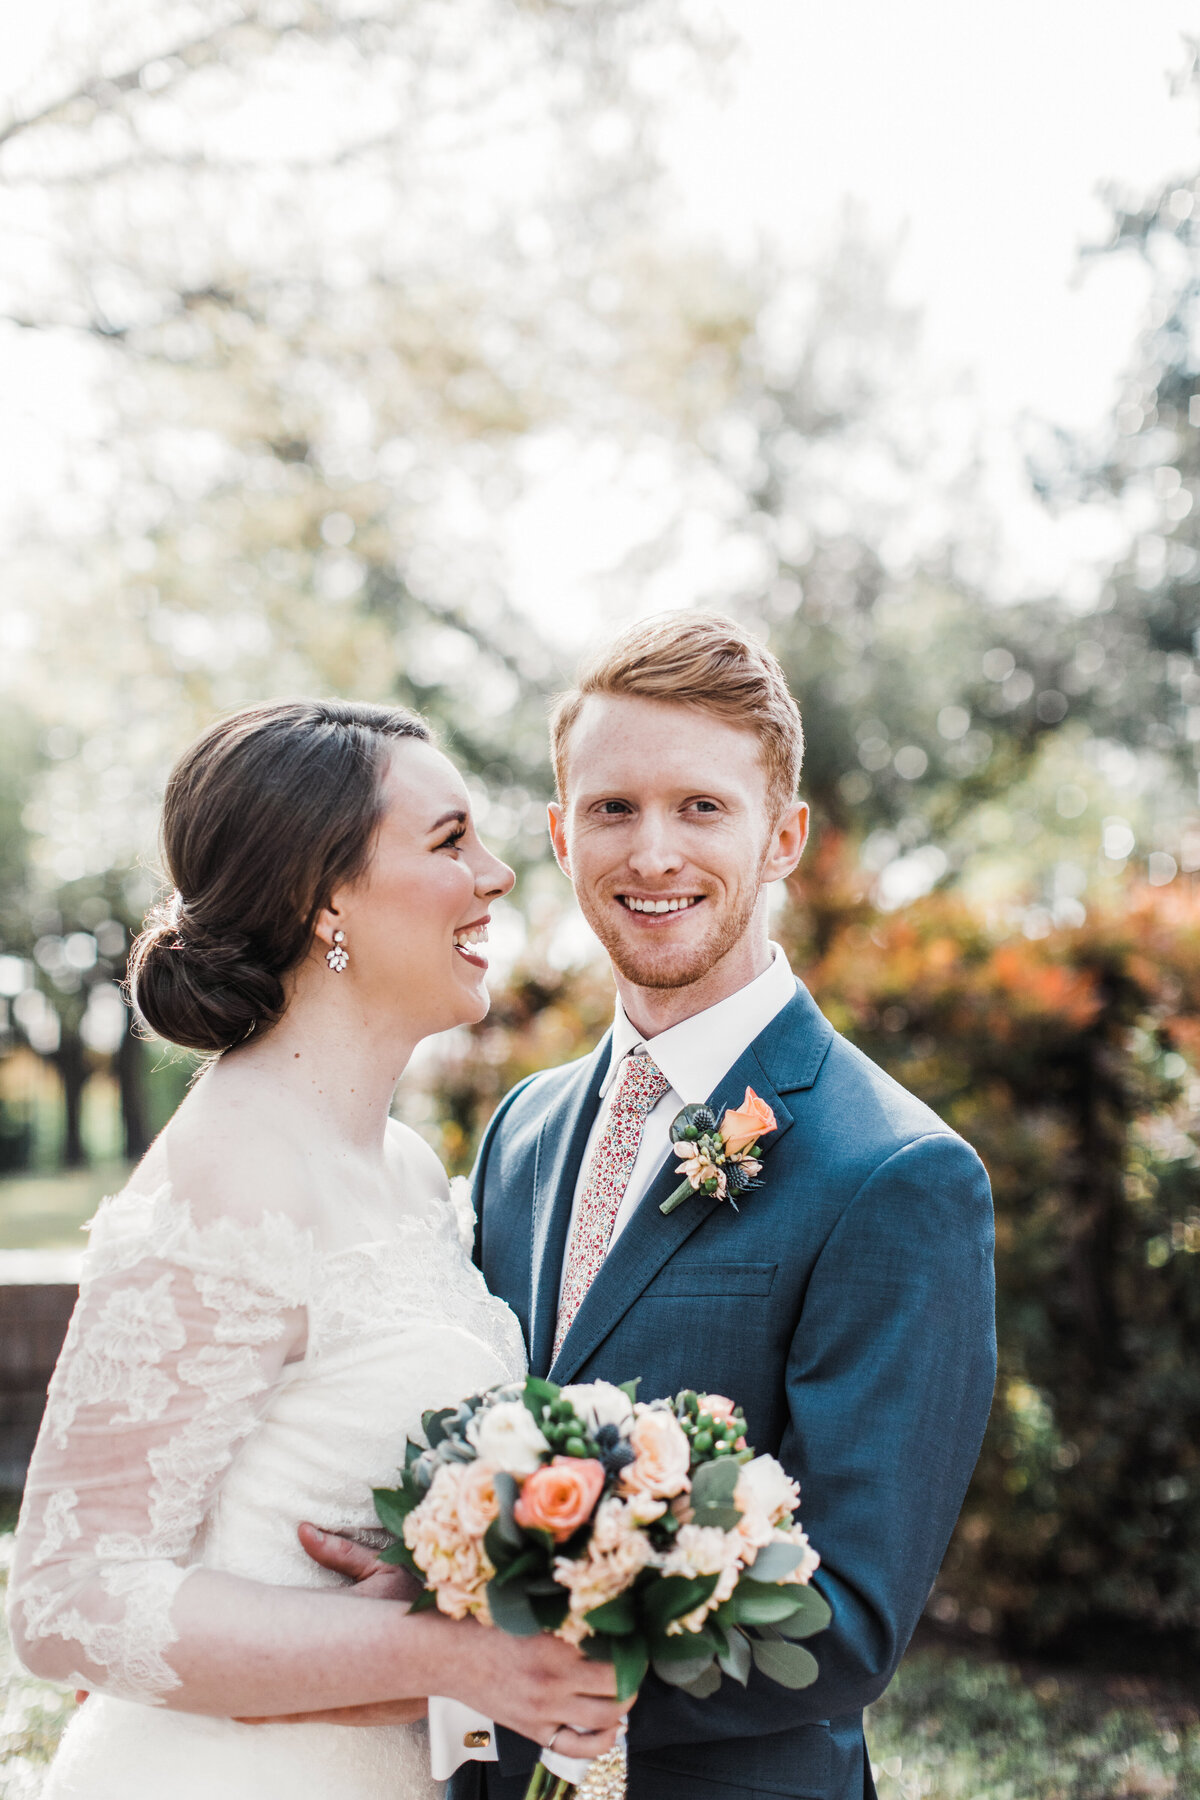 Portrait of a bride and groom outside of the Marty Leonard Community Chapel on their wedding day in Fort Worth, Texas. The groom smiles toward the camera while holding the bride close who is smiling joyfully at him. The bride is on the left and is wearing a long sleeve, intricate, white dress while holding a bouquet. The groom is on the right and is wearing a navy suit with a floral tie and boutonniere.